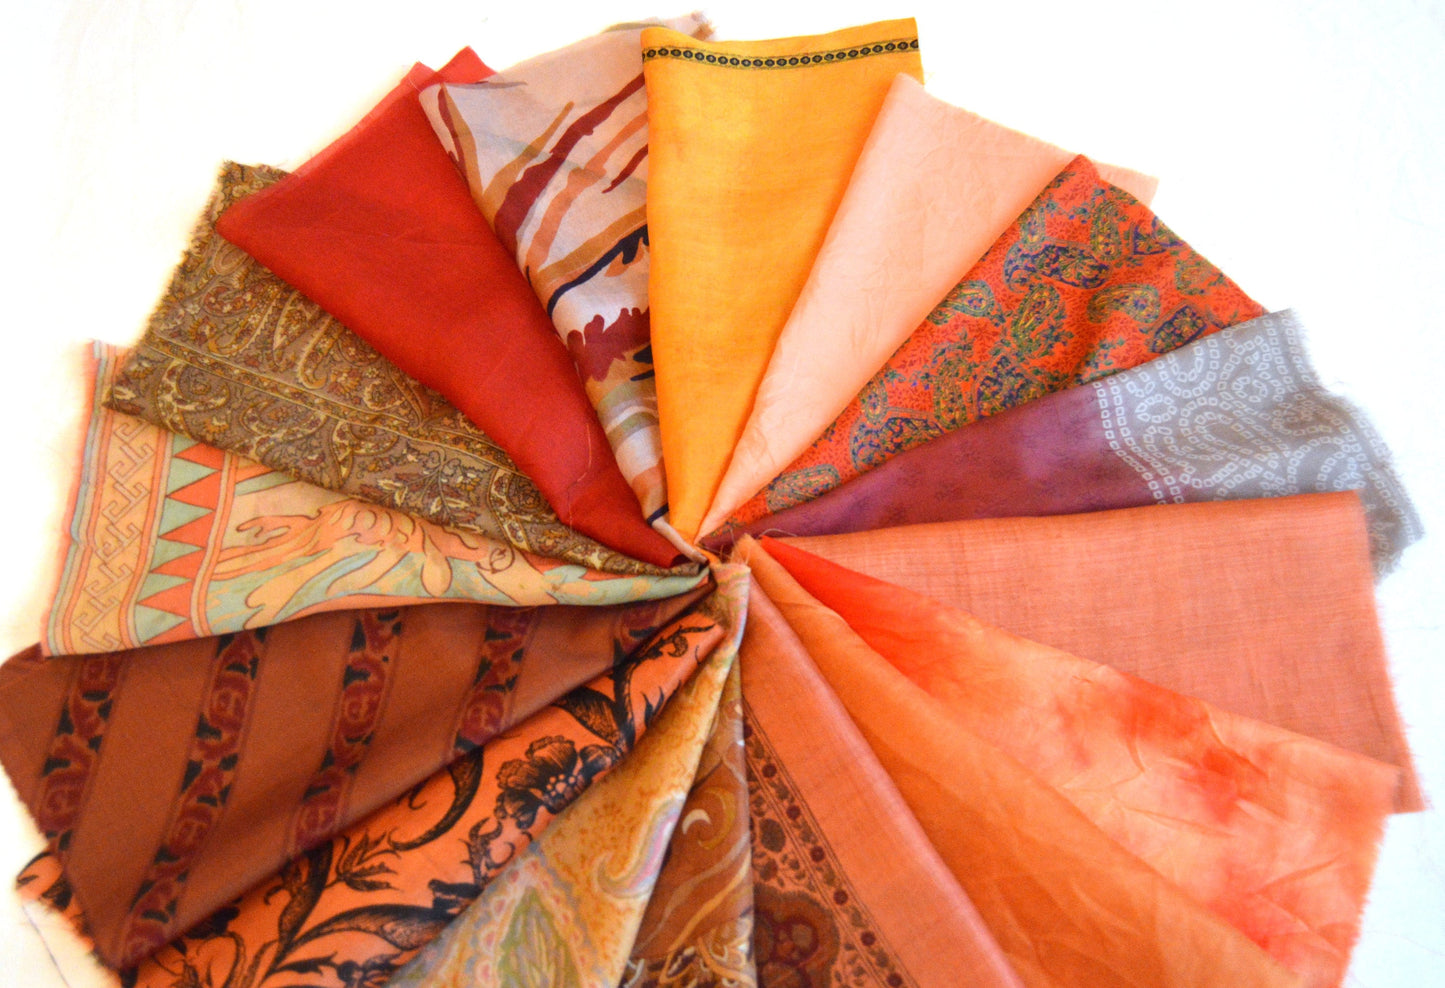 10 Inch x 16 Pieces Recycled Vintage Silk Sari Scraps Remnants Craft Fabric Card Making Collage Mixed Media Textile Art Sewing Junk Journals